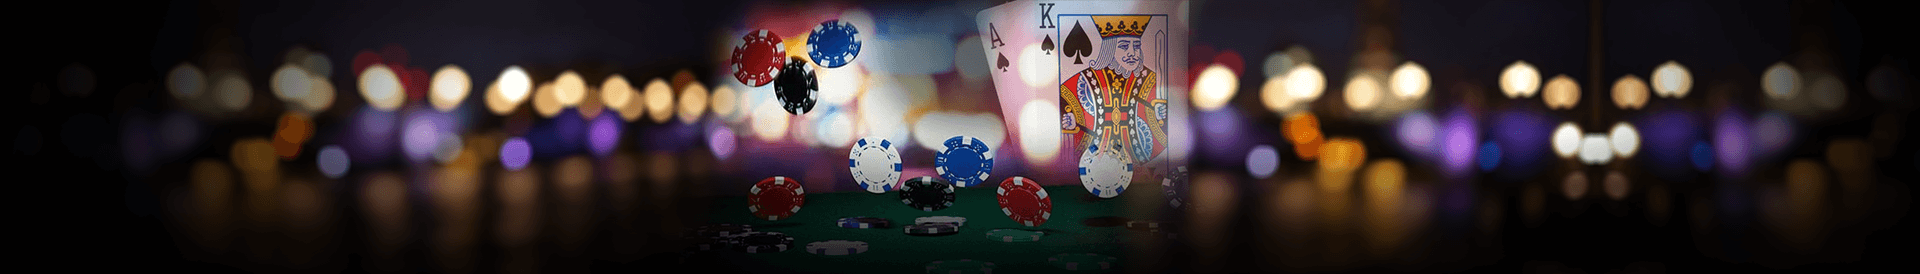 10 tips for new casino players desktop